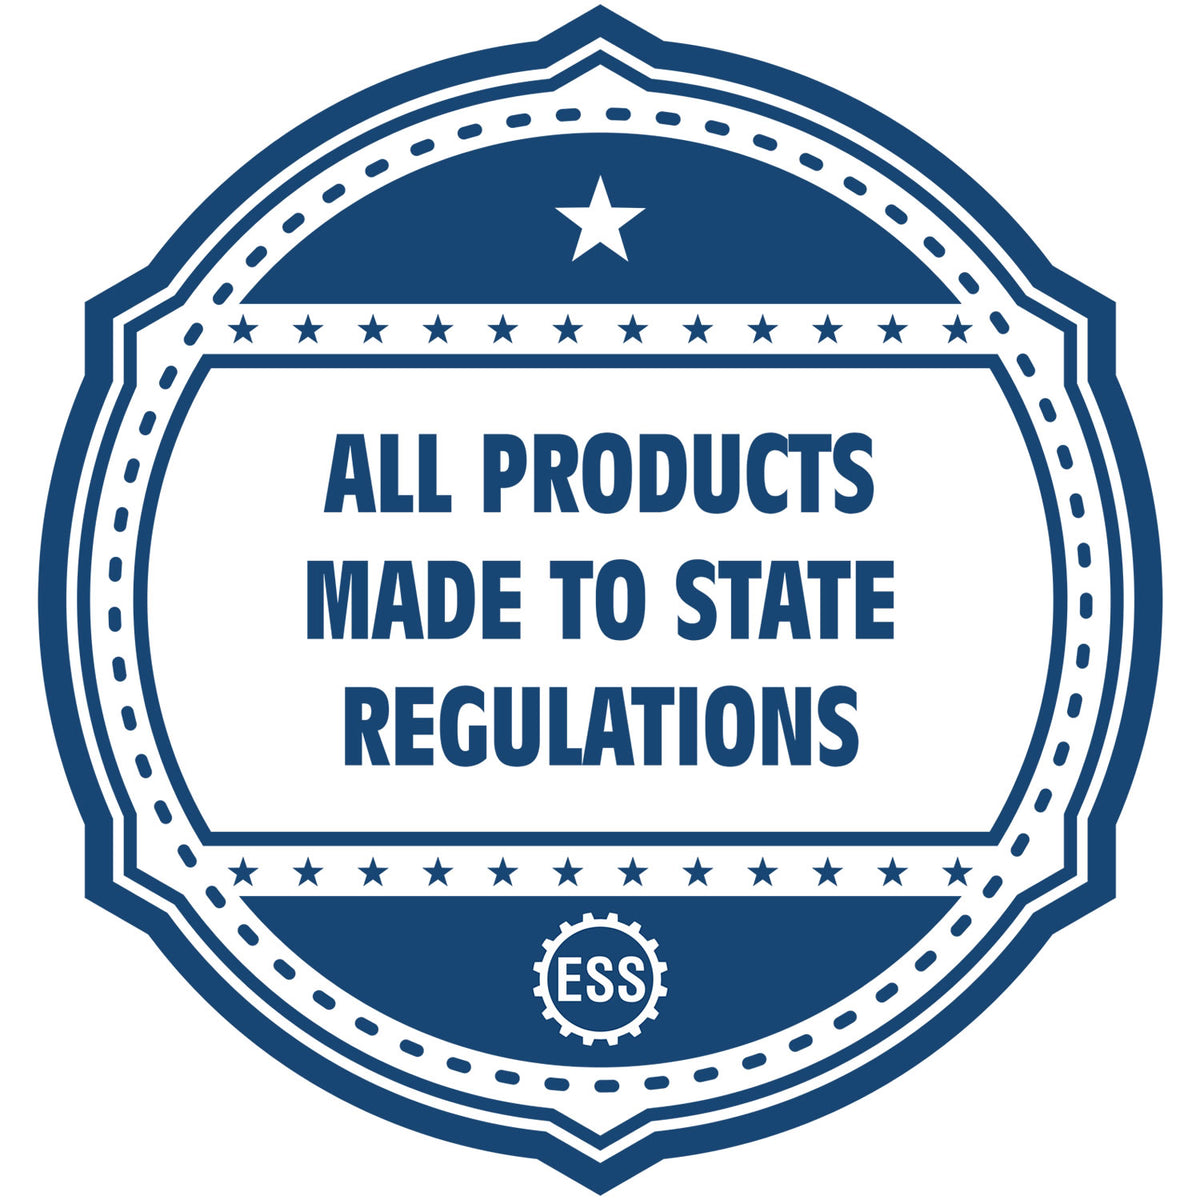 An icon or badge element for the PSI South Dakota Notary Stamp showing that this product is made in compliance with state regulations.